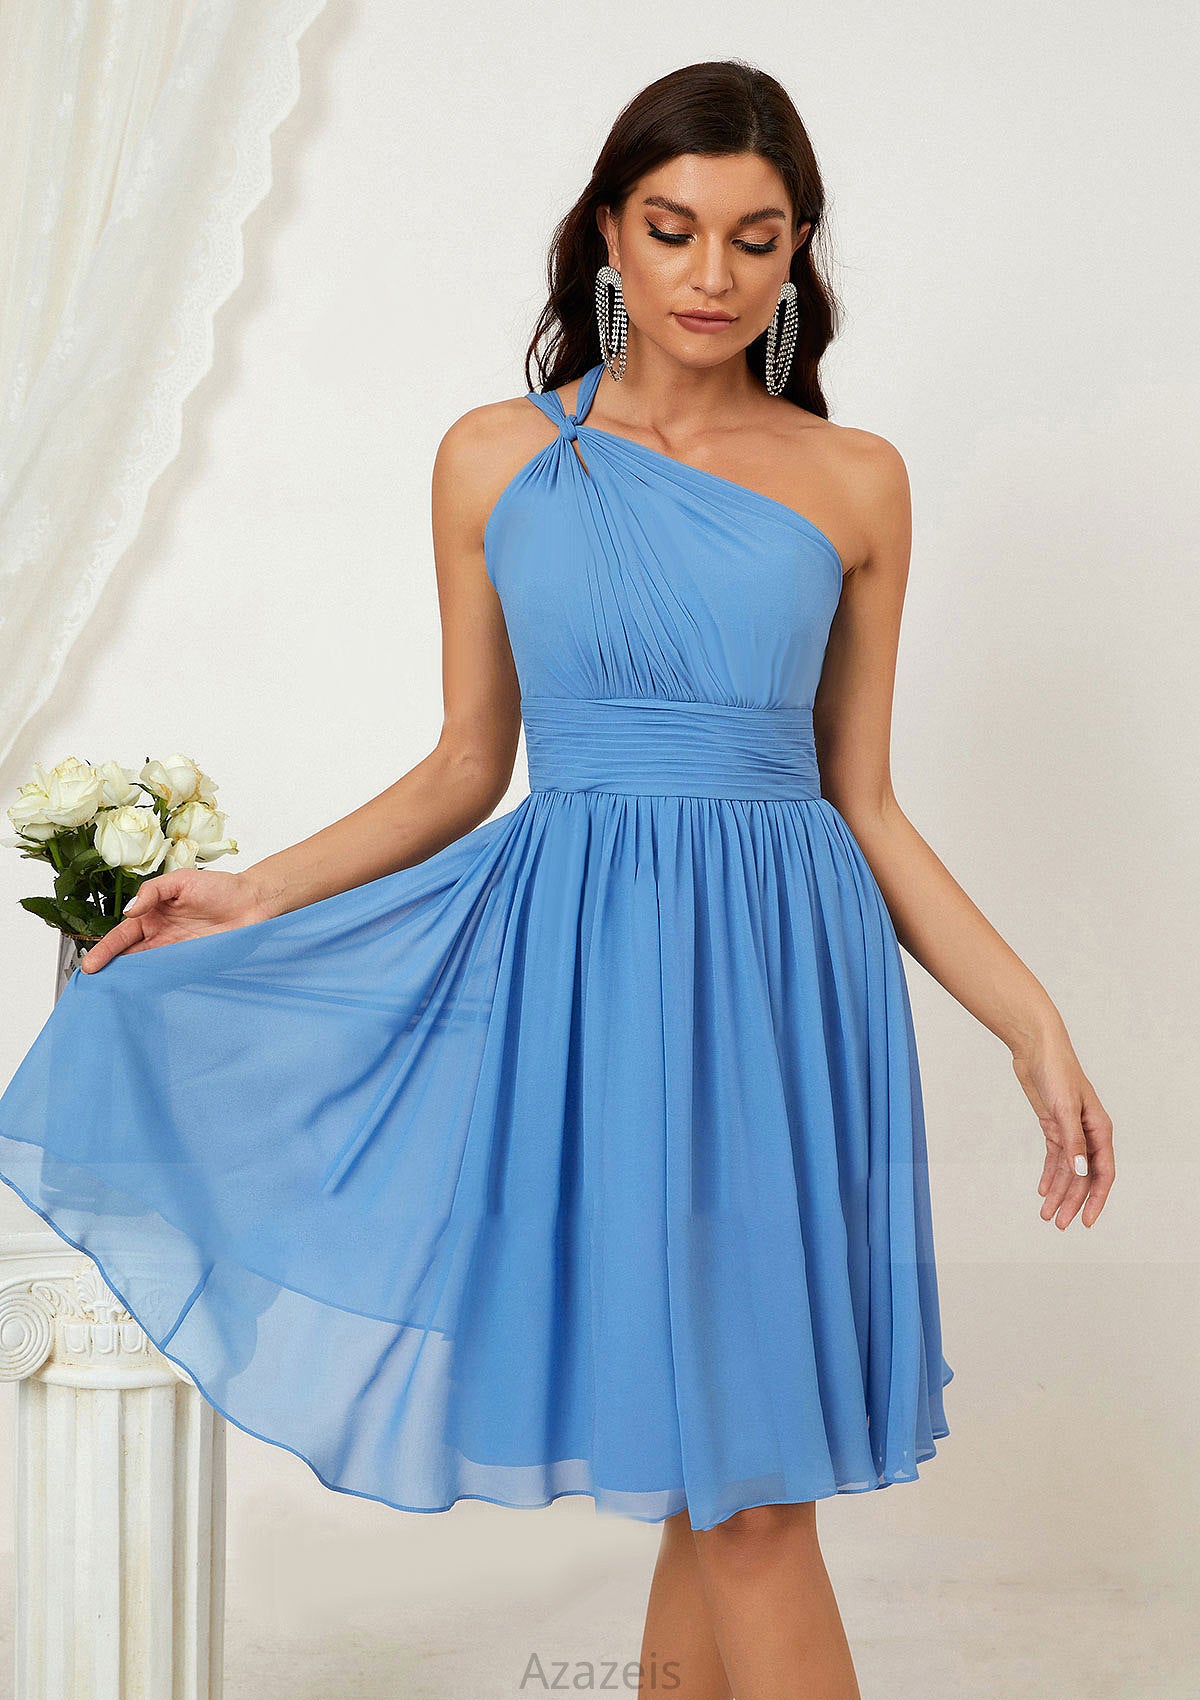 A-line One-Shoulder Sleeveless Chiffon Knee-Length Bridesmaid Dresses With Pleated Luciana DFP0025612